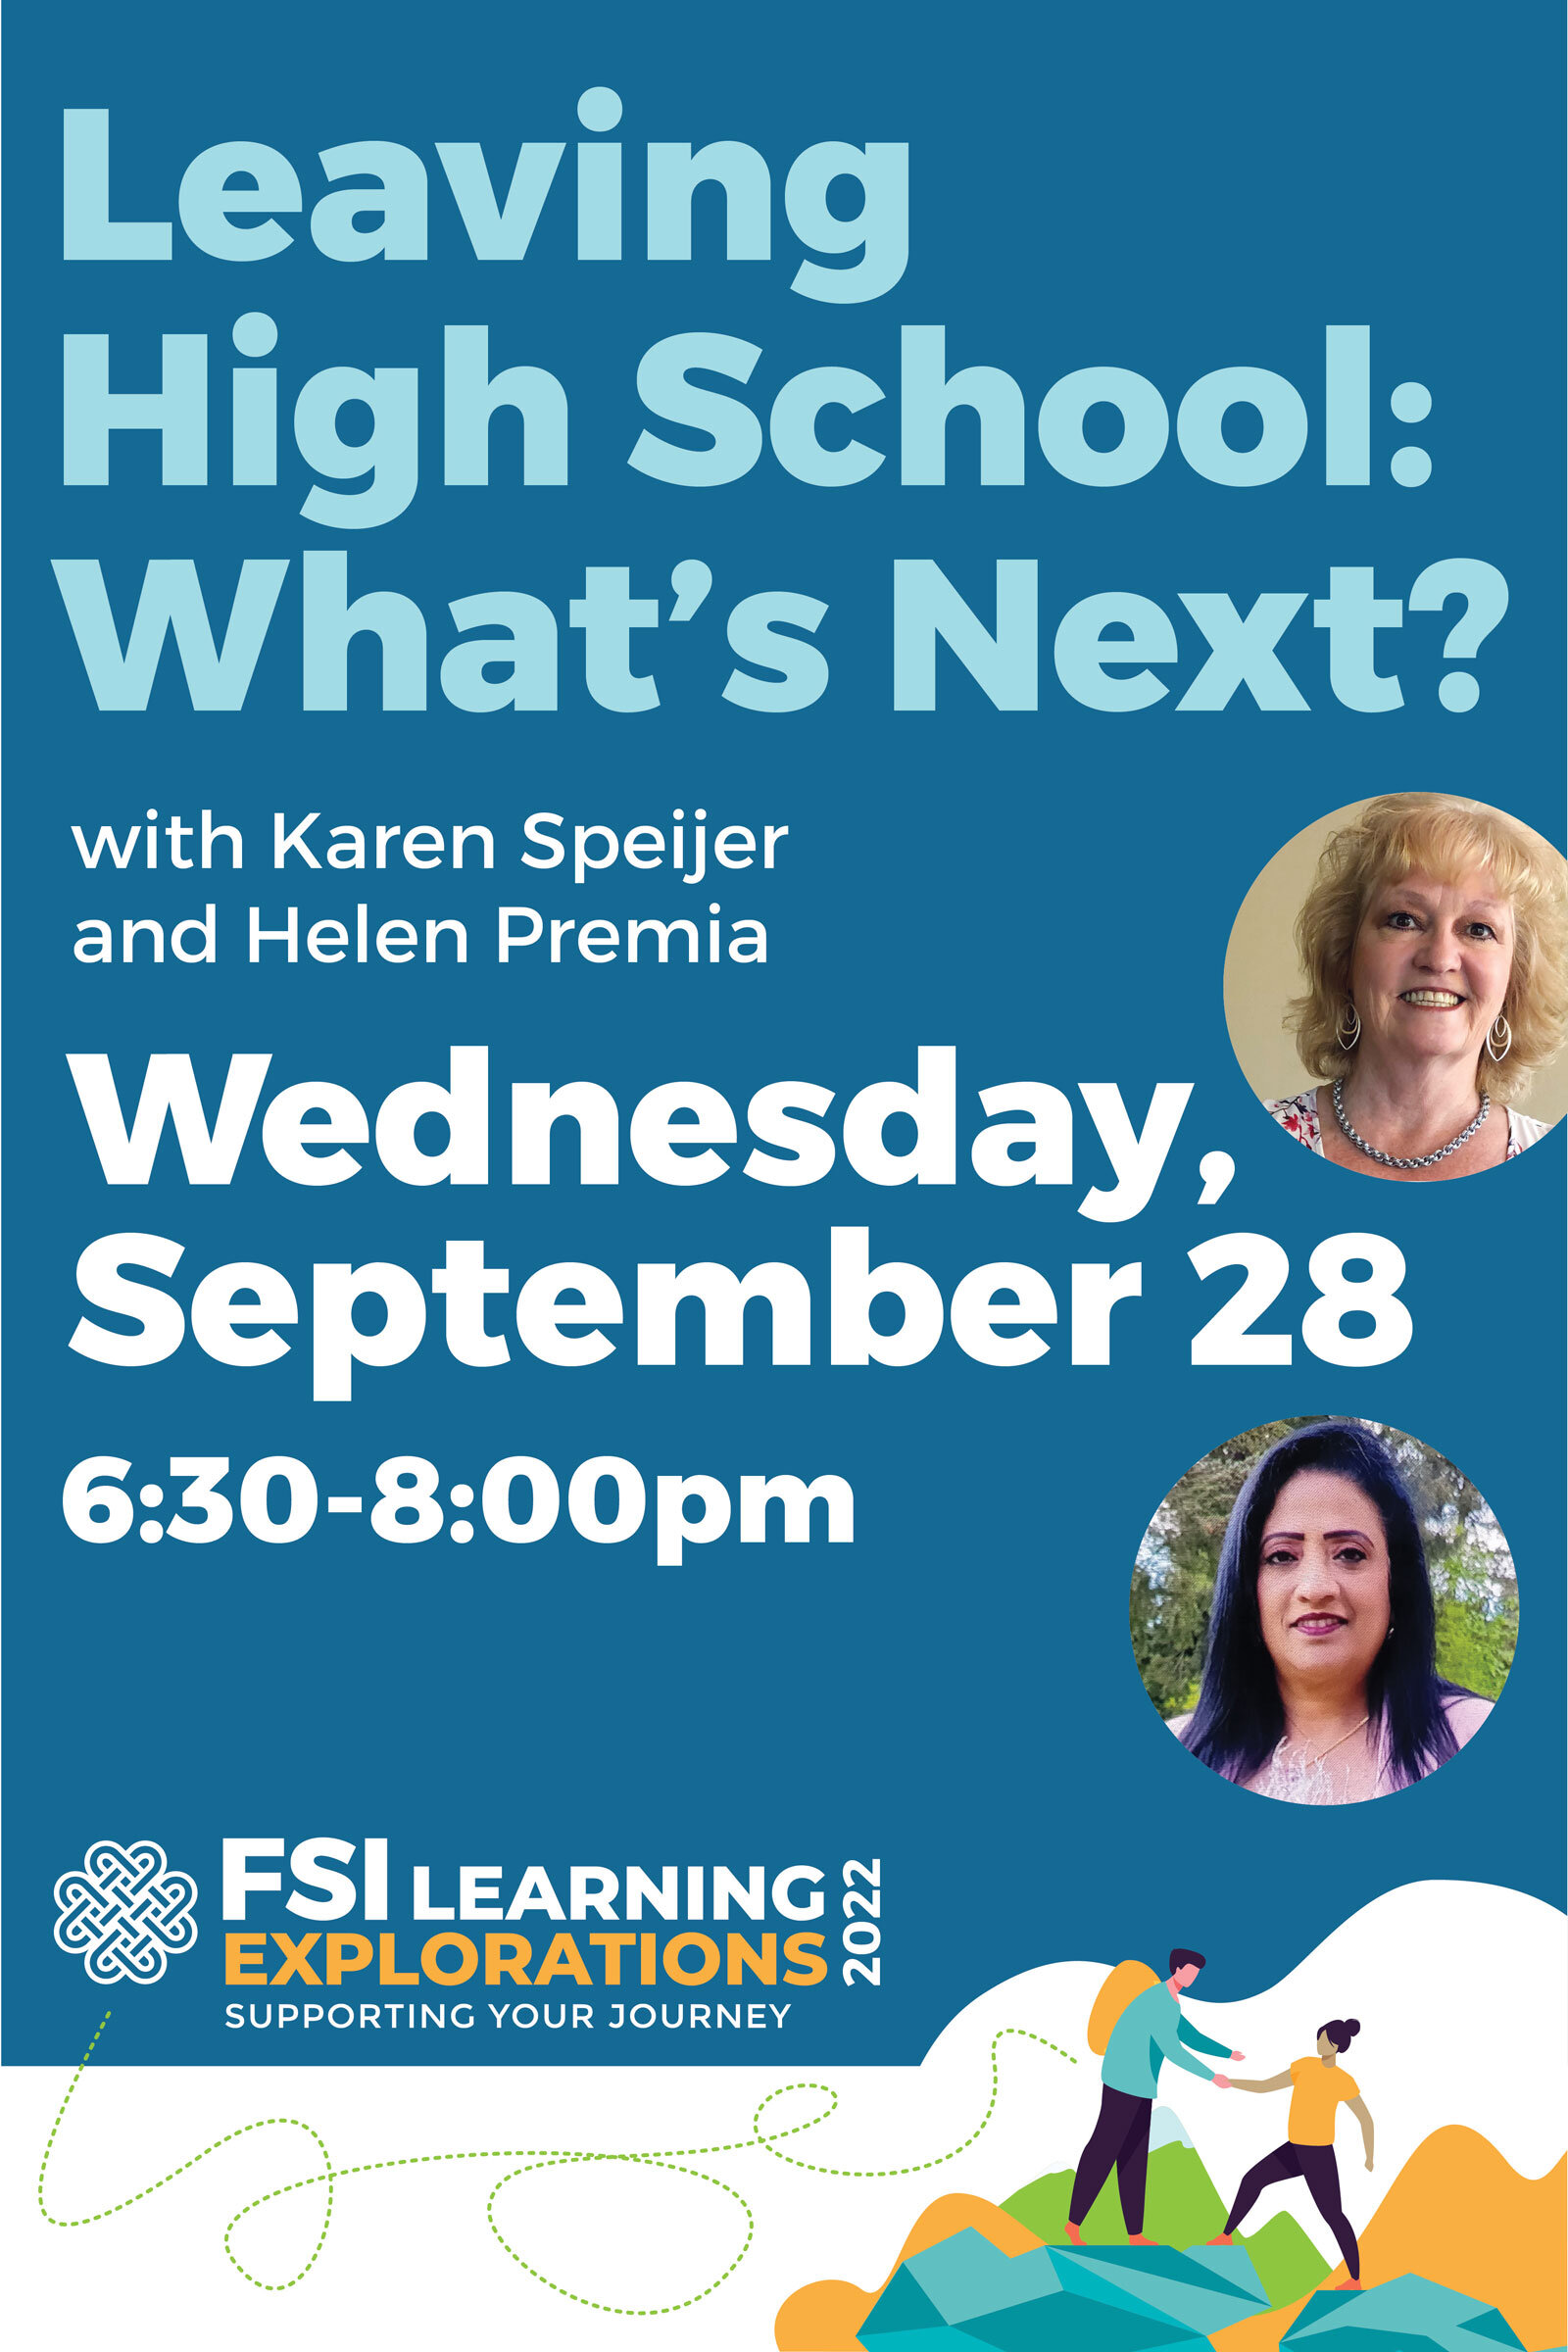 FSI Learning Explorations - Leaving High School, What's Next? with Karen Speijer and Helen Premia